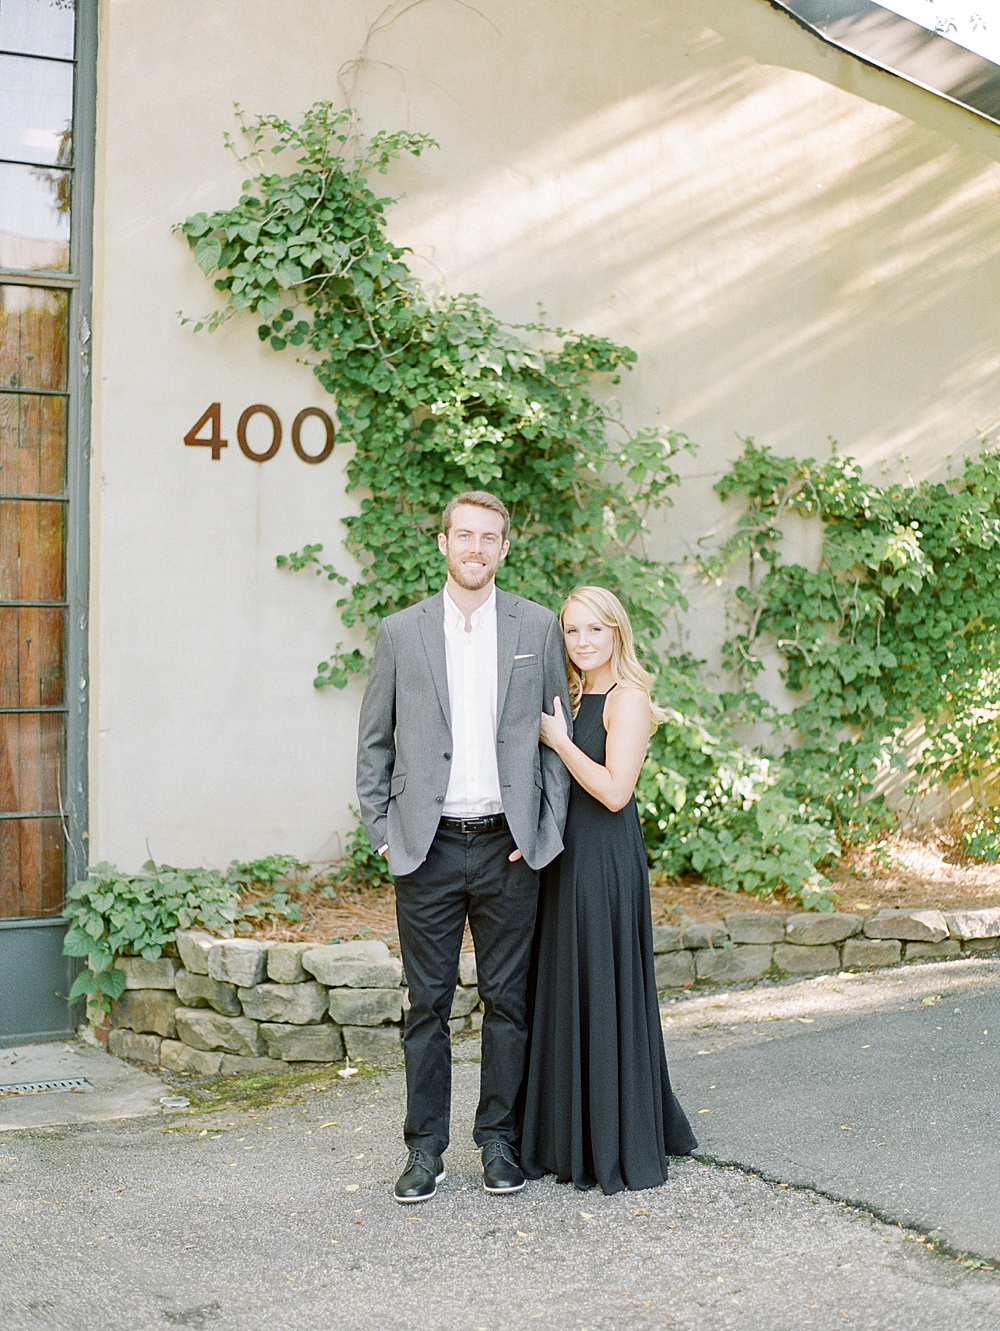 Girl wearing black dress and guy wearing suit for their engagement outfit